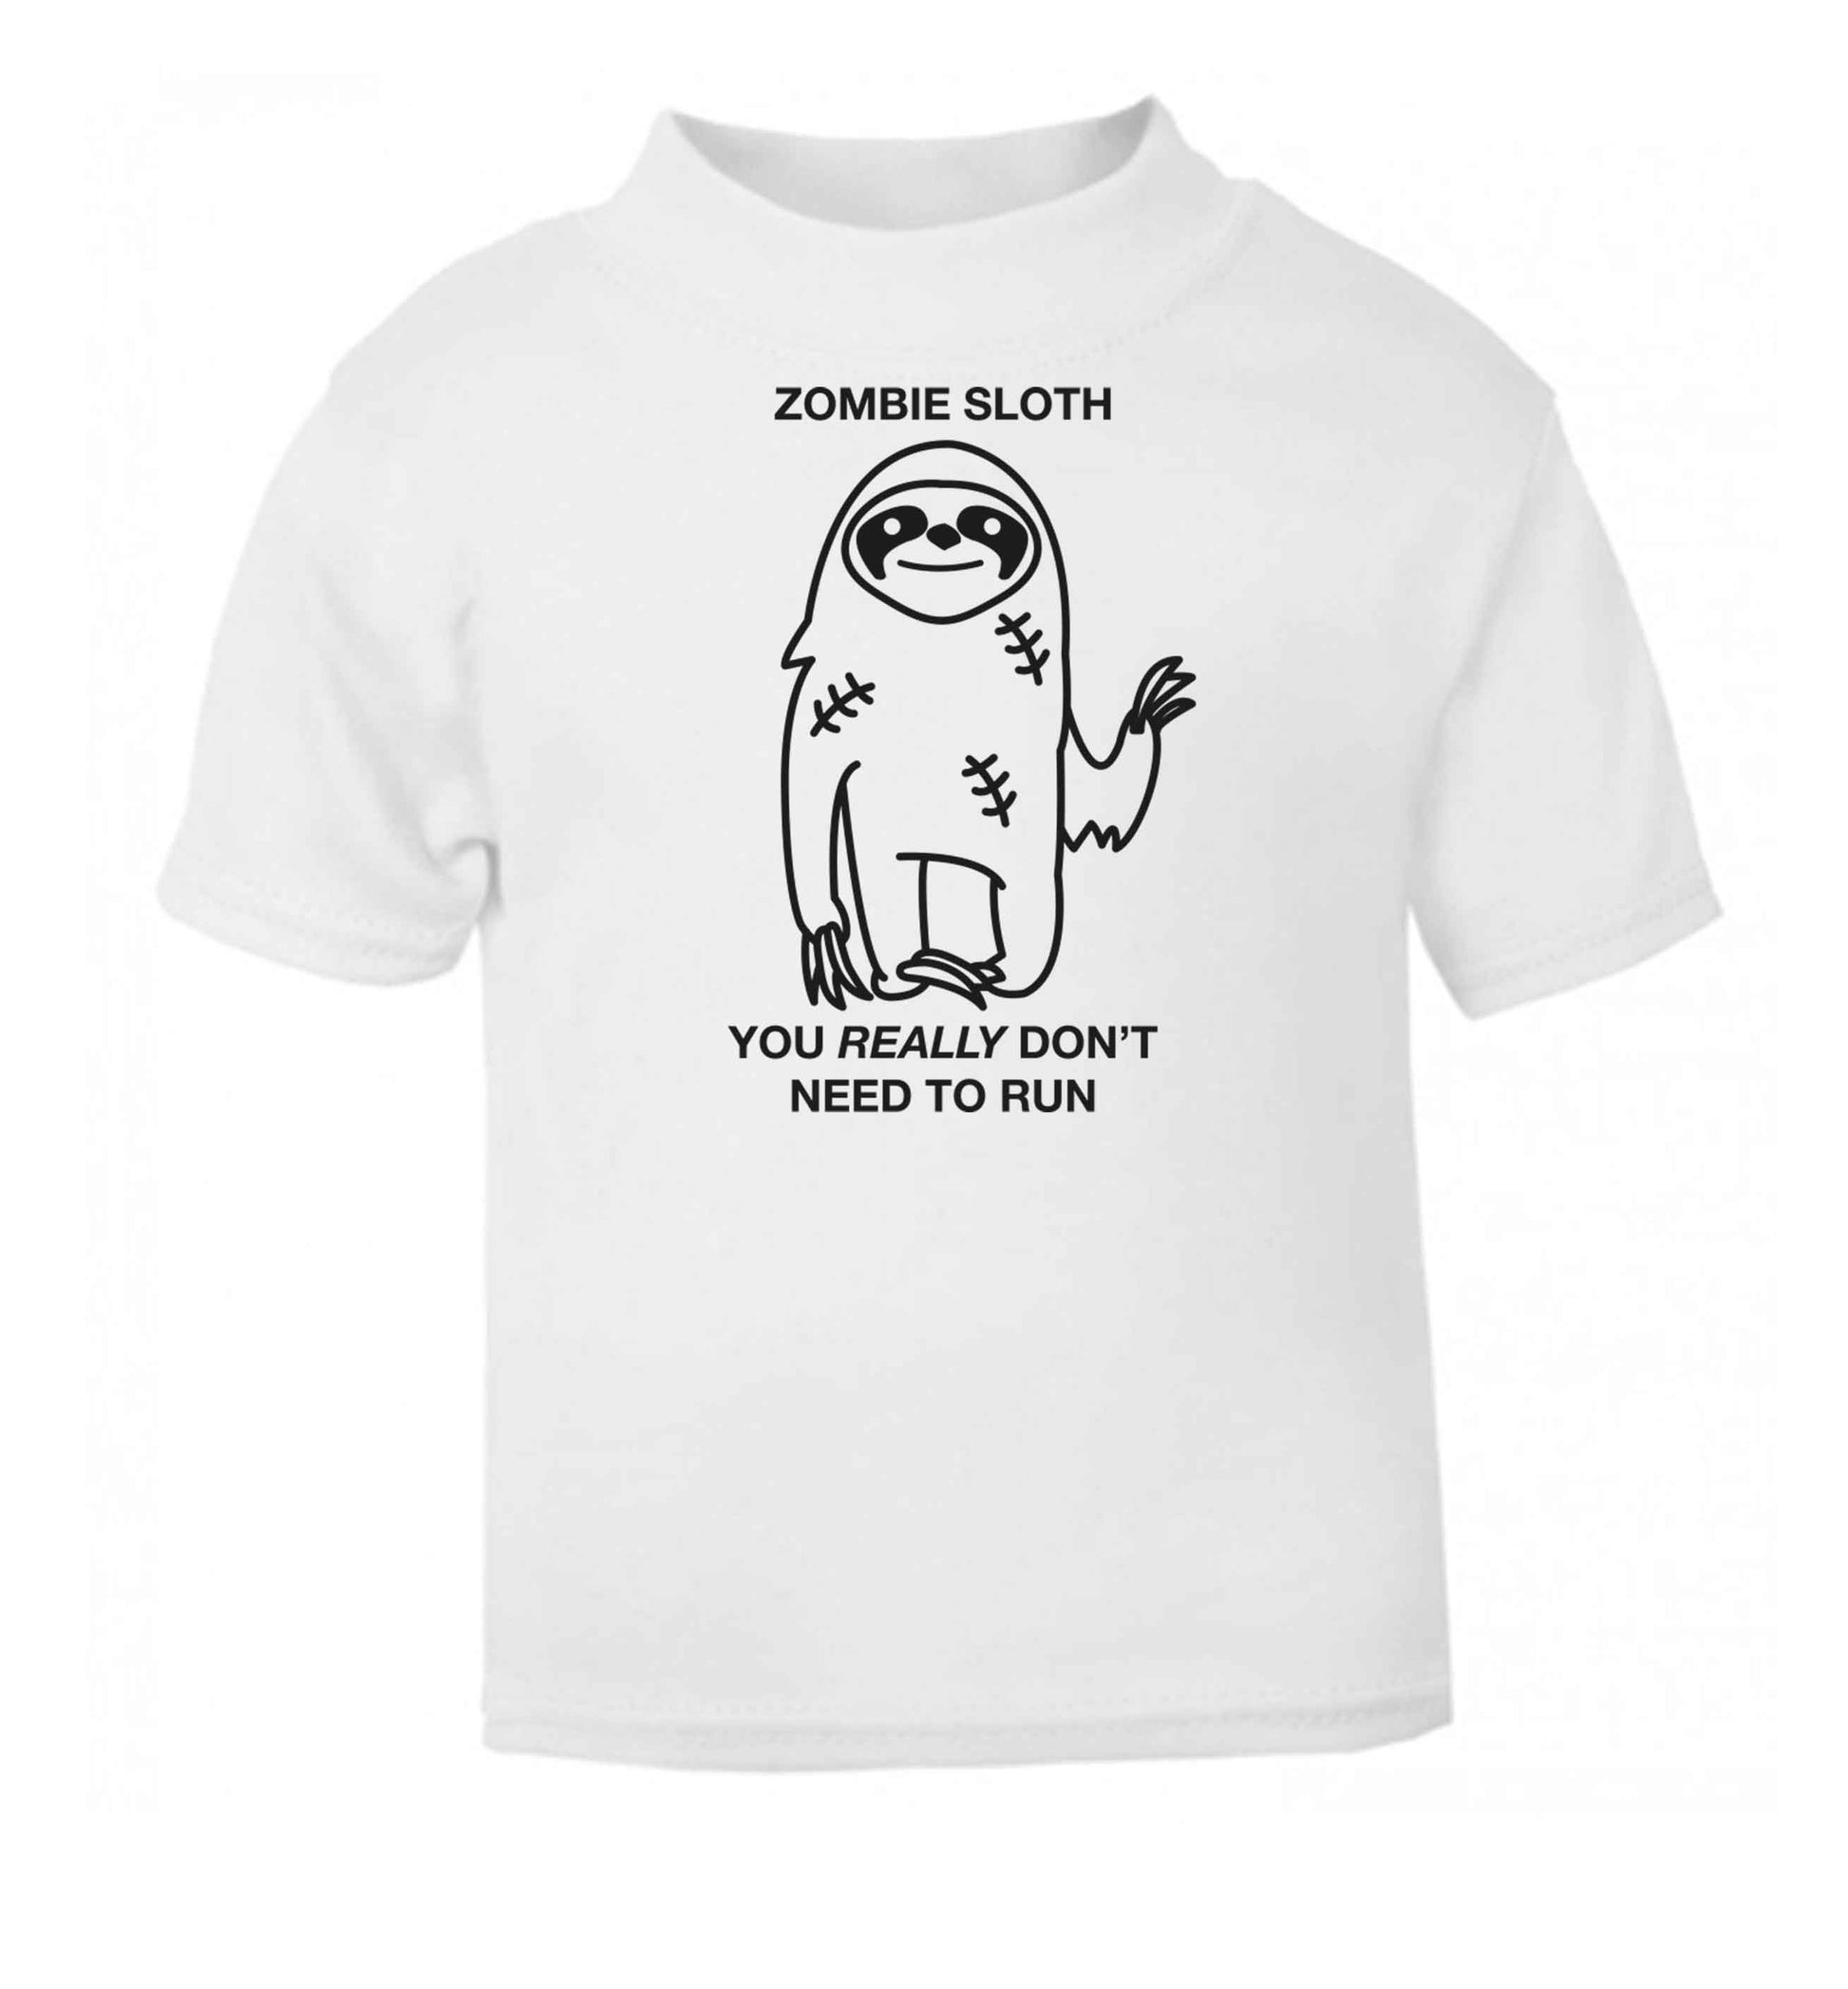 Zombie sloth you really don't need to run white baby toddler Tshirt 2 Years